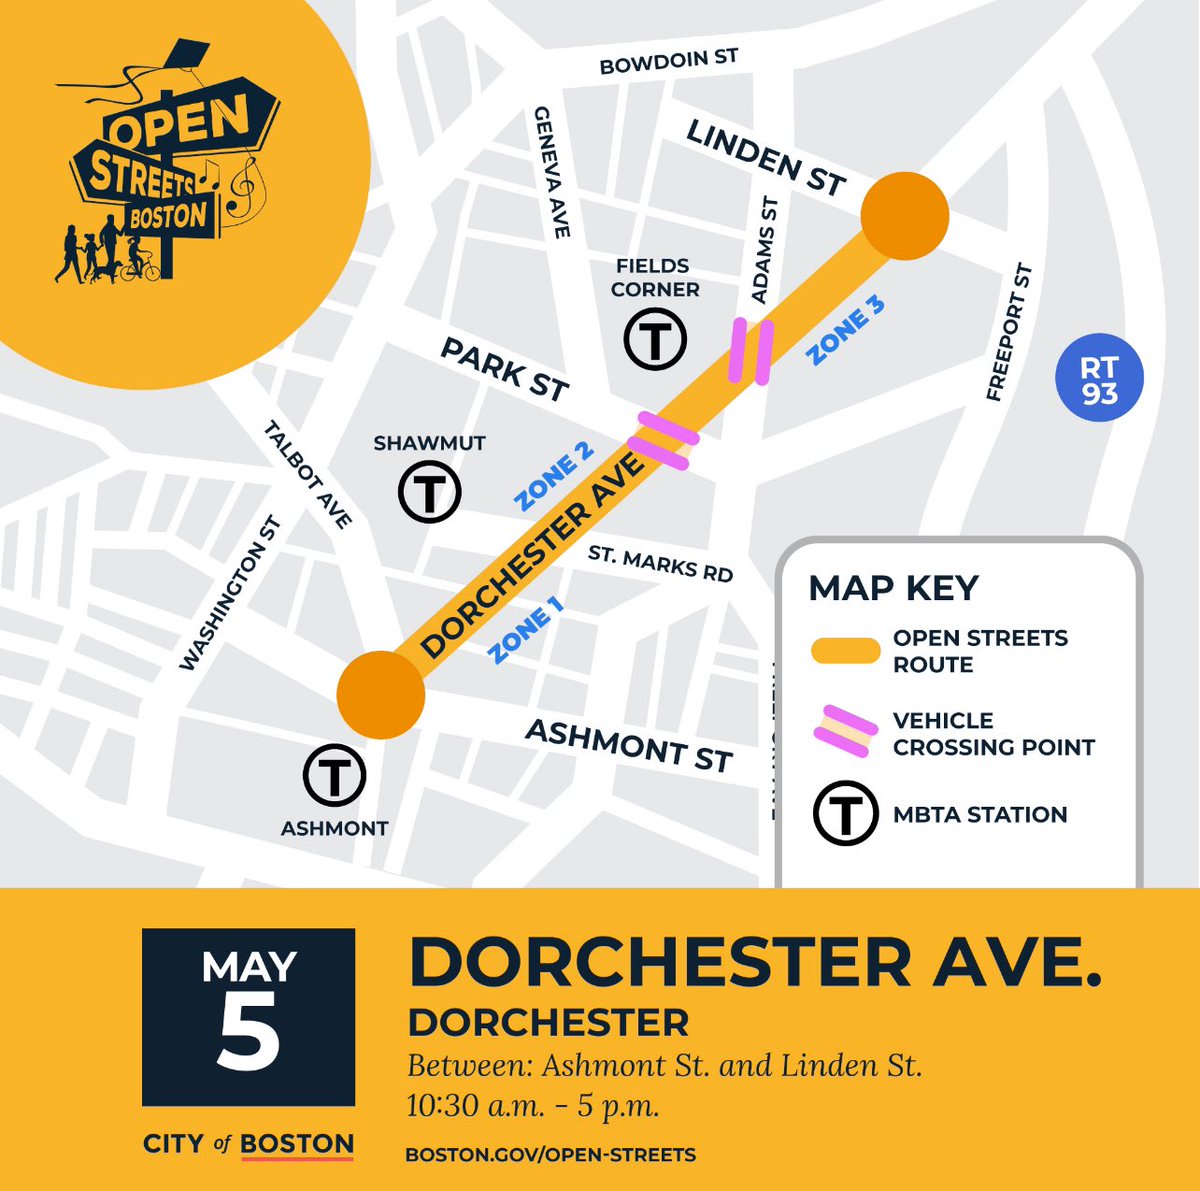 Open Streets is back! Join us on Sunday, May 5 from 10:30 am - 5 pm on Dorchester Ave. (from Ashmont St. to Linden St.) to experience this car-free public space. Come bike, walk & roll while you connect with neighbors and businesses owners. For more info: boston.gov/departments/tr…